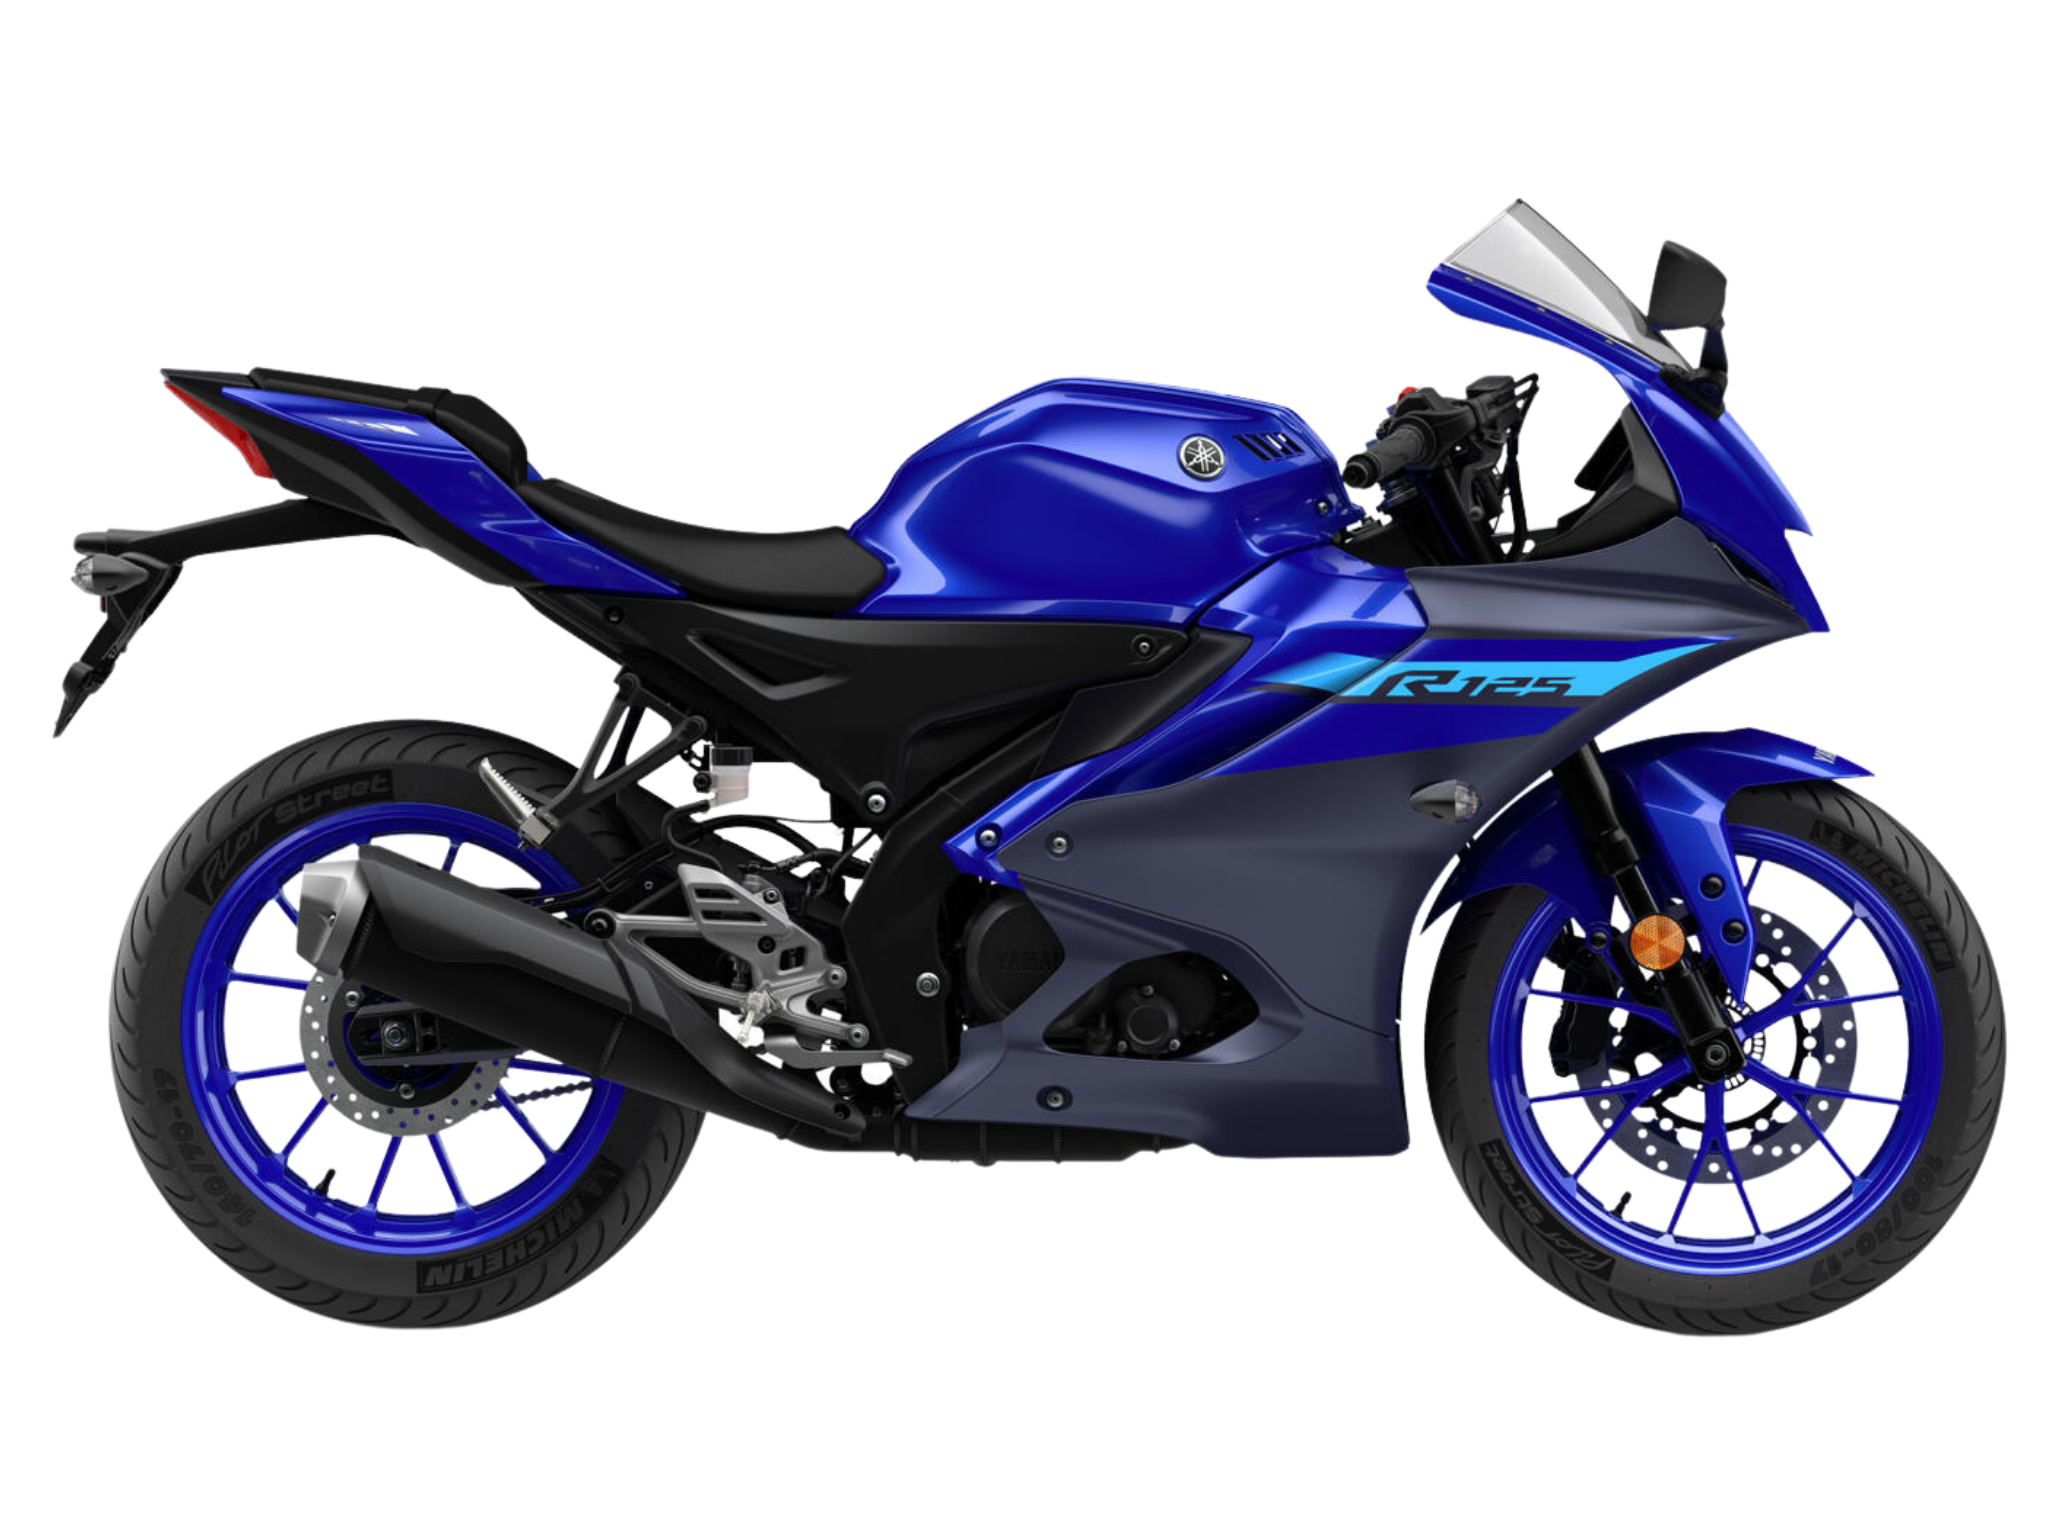 4. Yamaha R125 (The Ultimate 125cc Supersport Riding Experience)